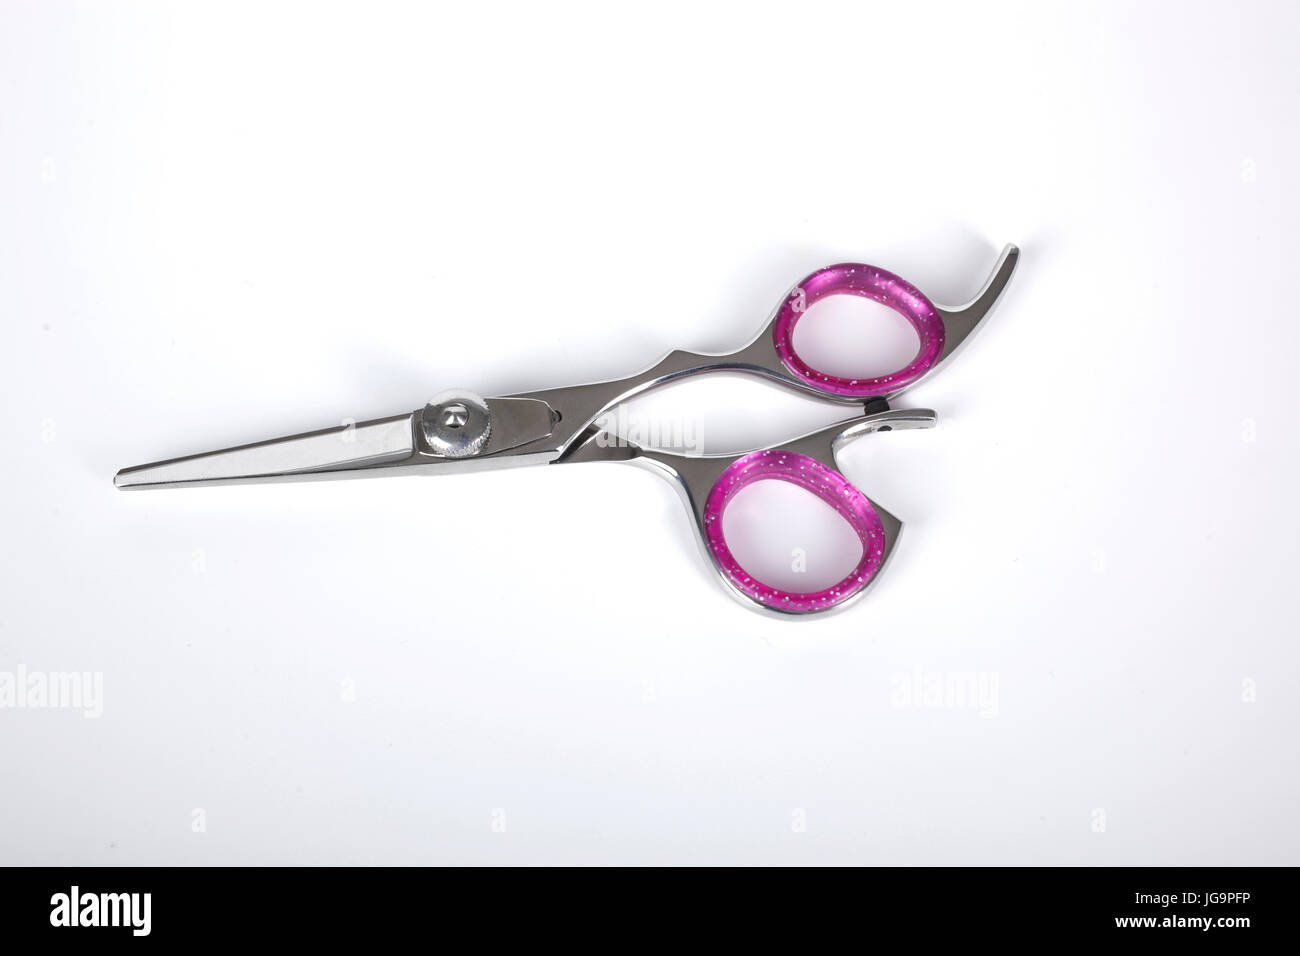 Professional haircutting scissors isolated on white background. Silver metal, stainless steel scissors. Stock Photo